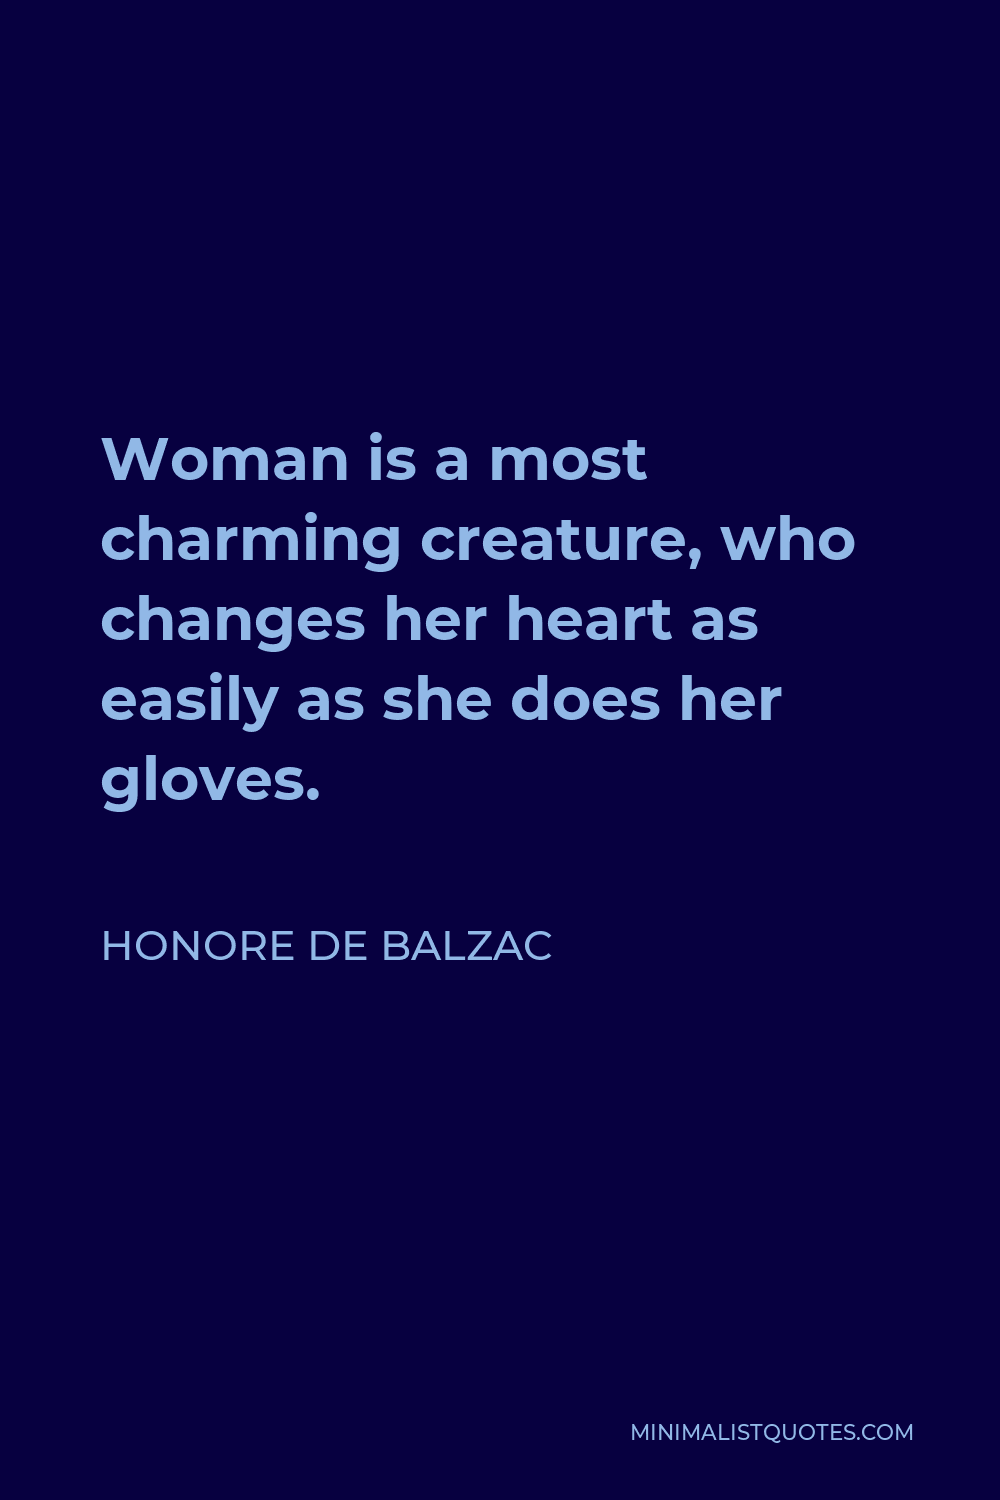 Honore de Balzac Quote - Woman is a most charming creature, who changes her heart as easily as she does her gloves.